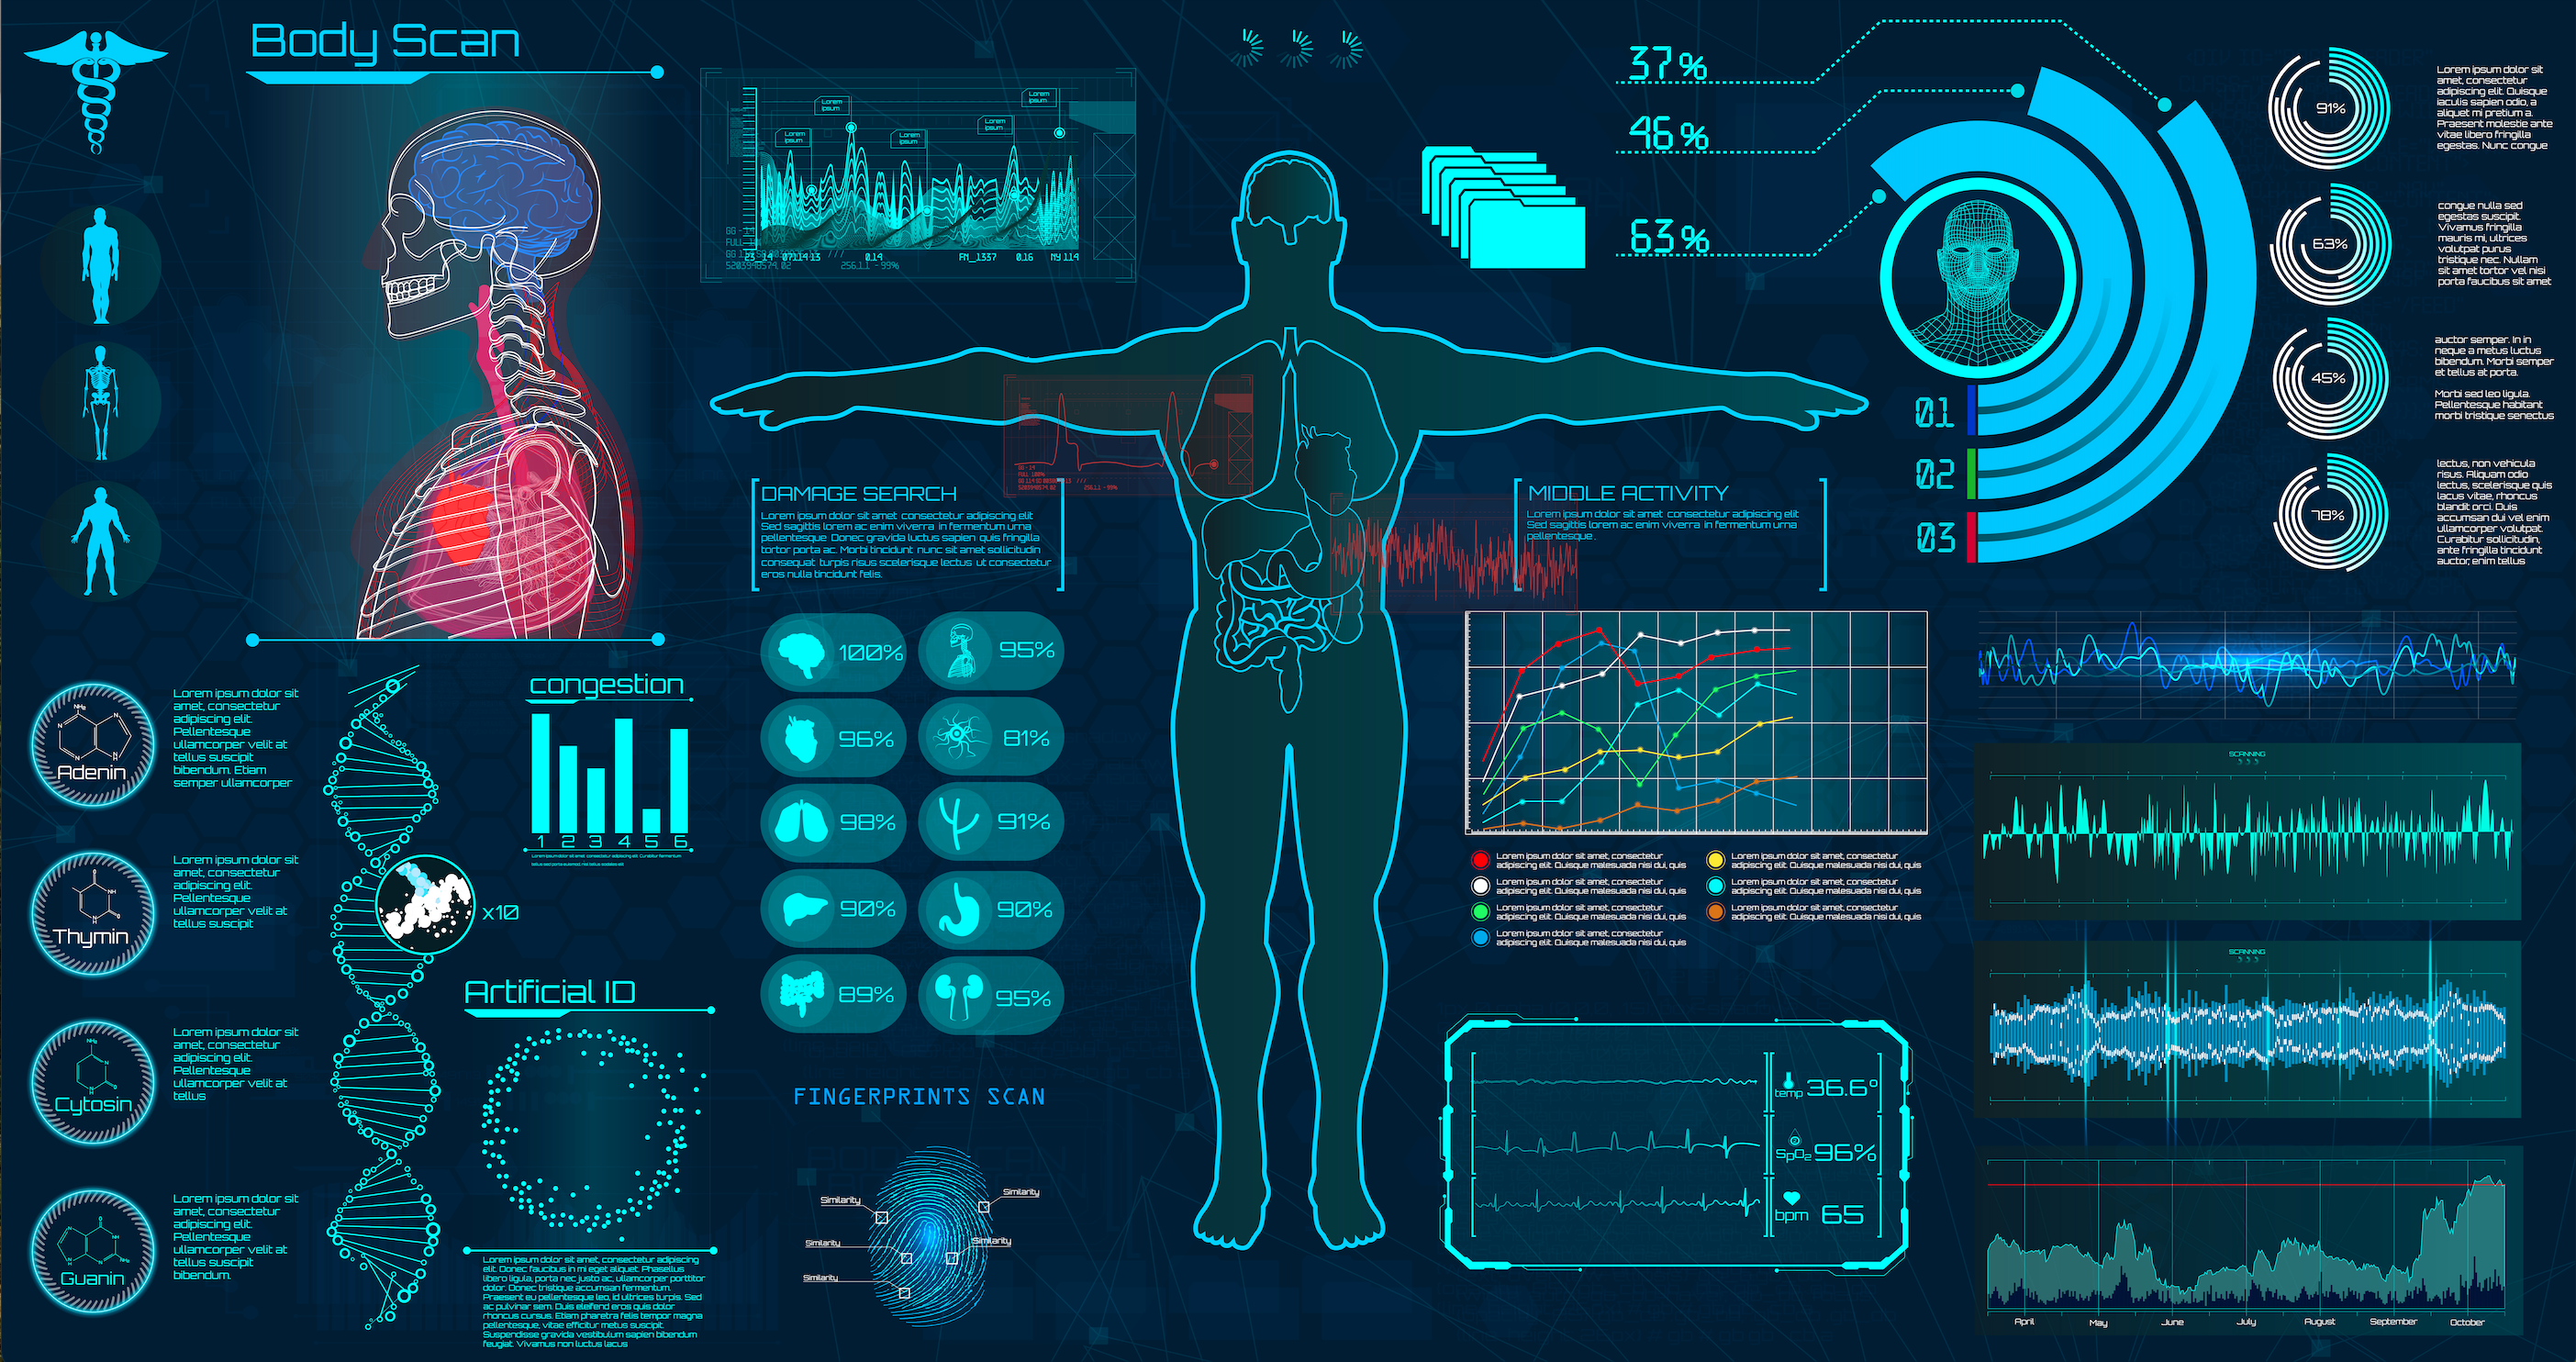 Healthcare organizations use many types of visualization tools, such as charts, tables, infographics, dashboards, and others